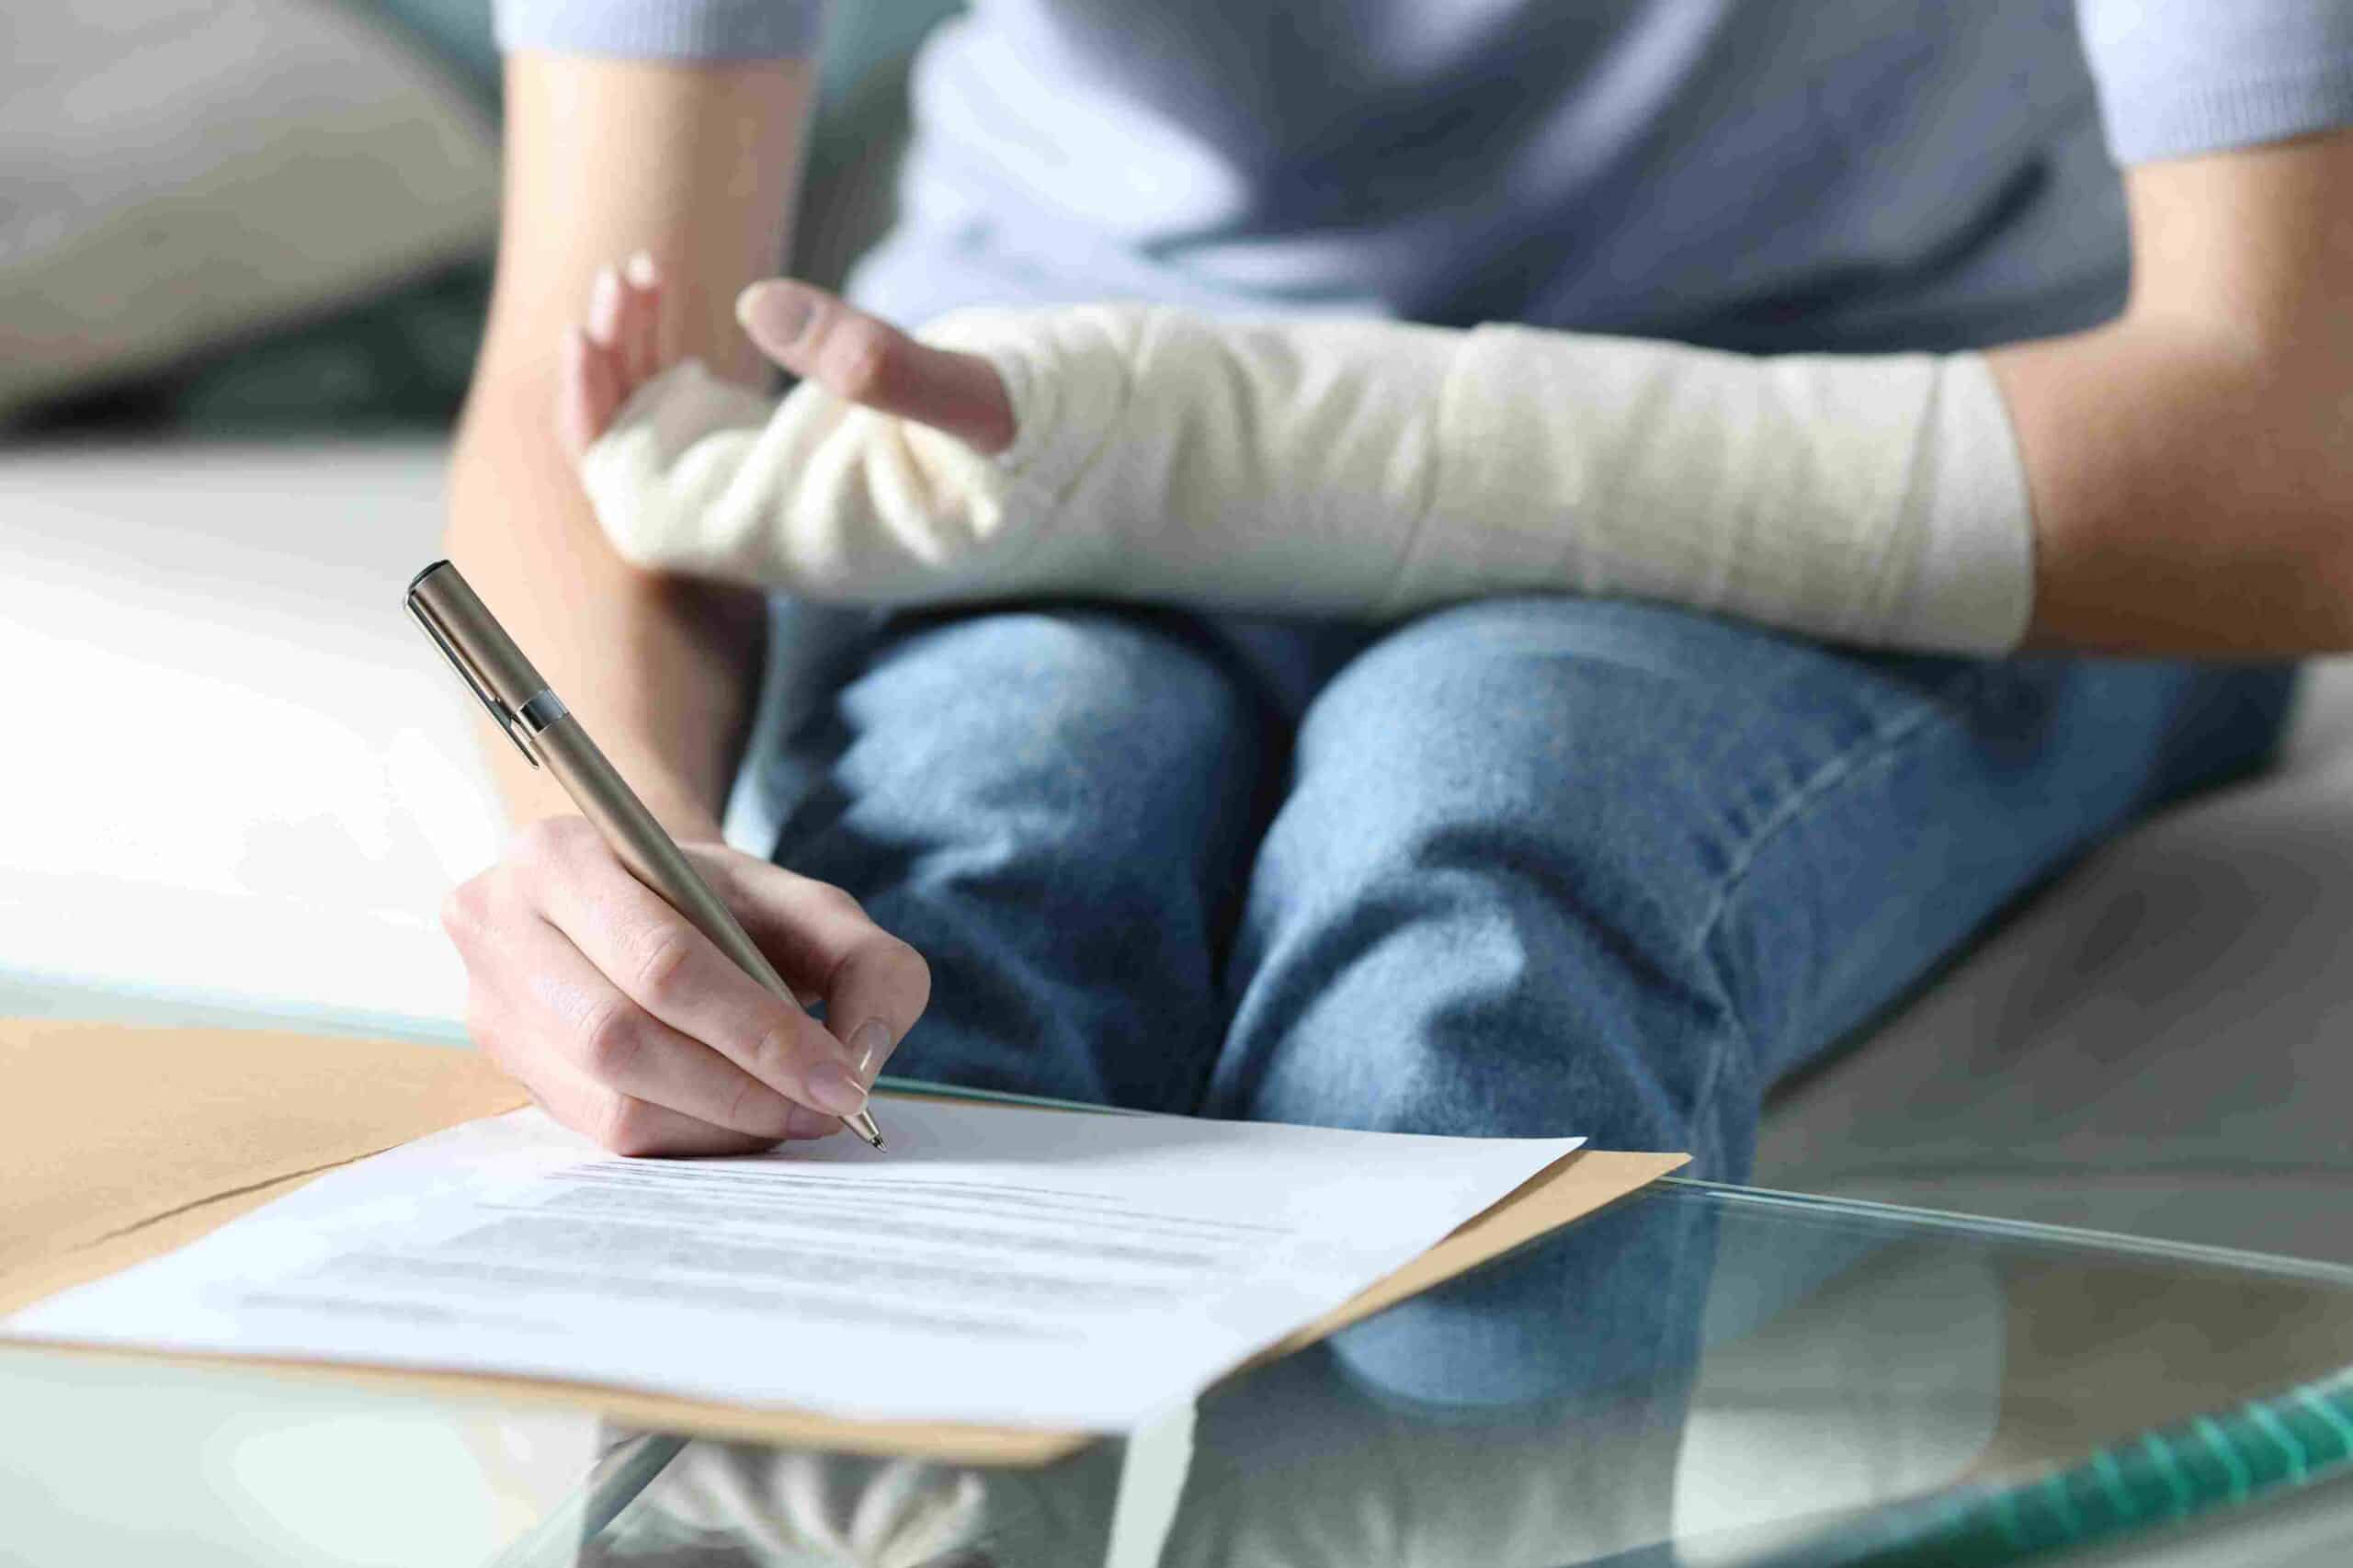 How to Document Your Injuries for a Personal Injury Case